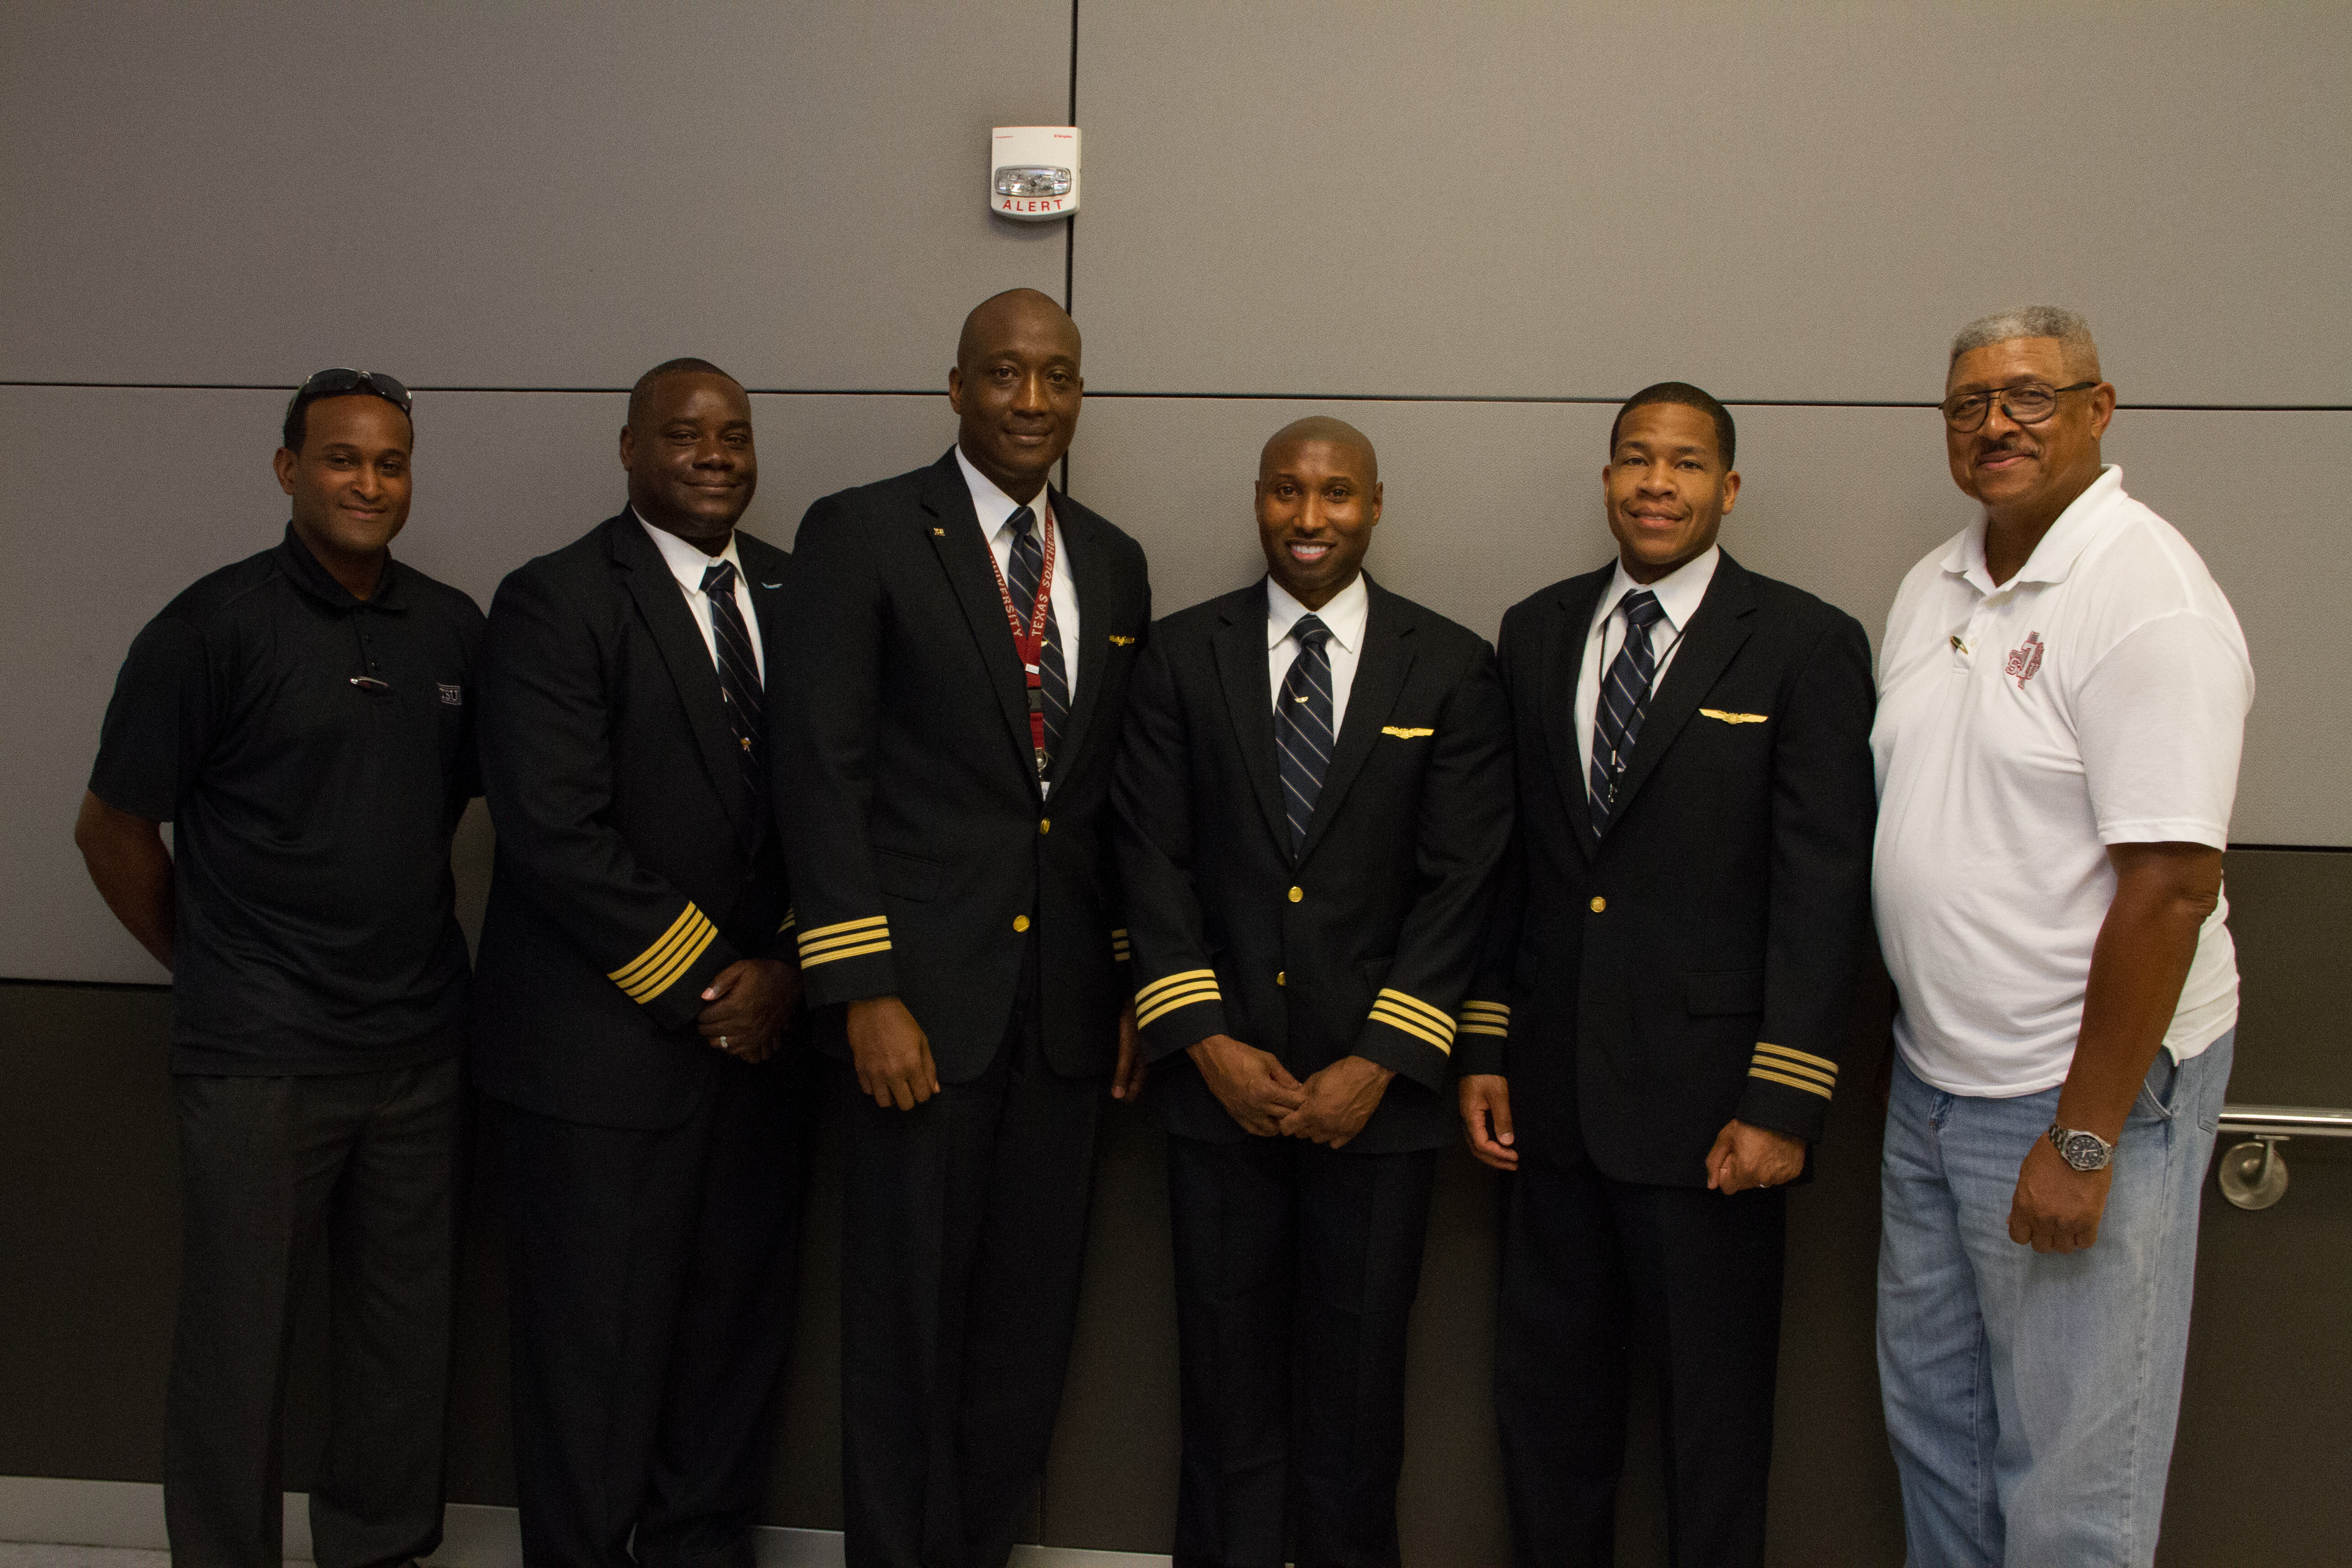 Captain Edwards stands proud with former students he trained; most who attended Sterling High School and who now work at major airlines like United. Pilot pictured her from left to right: Matthew Julien, Pascal Alexander, Donald Turner, Darren Waddleton, Brian Brown, Roscoe Edwards.